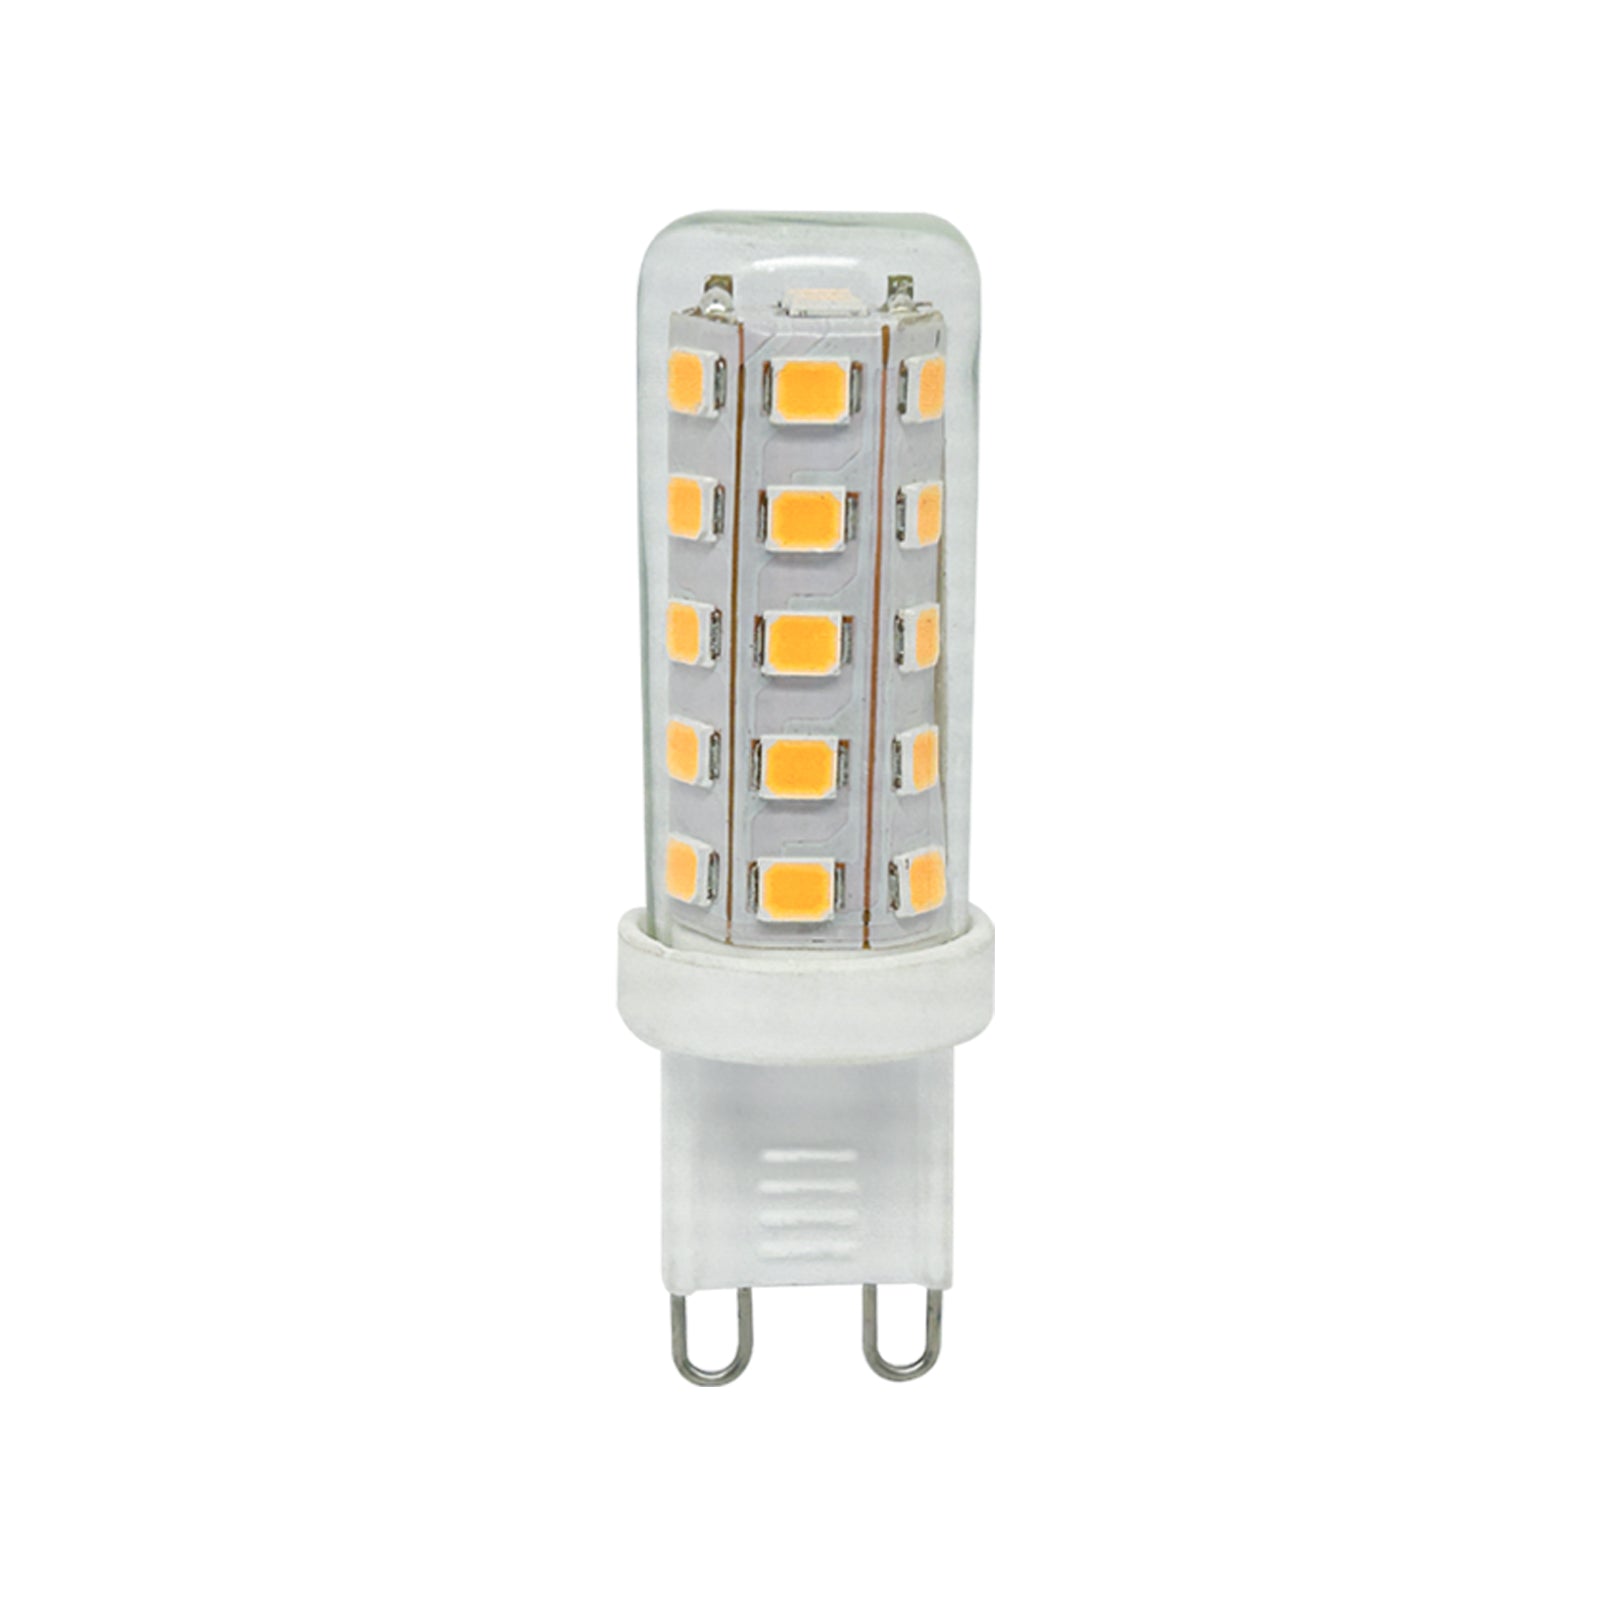 LED G9 Capsule 3W=25W 2 Pin Cool White 4000K Dimmable Light Bulbs